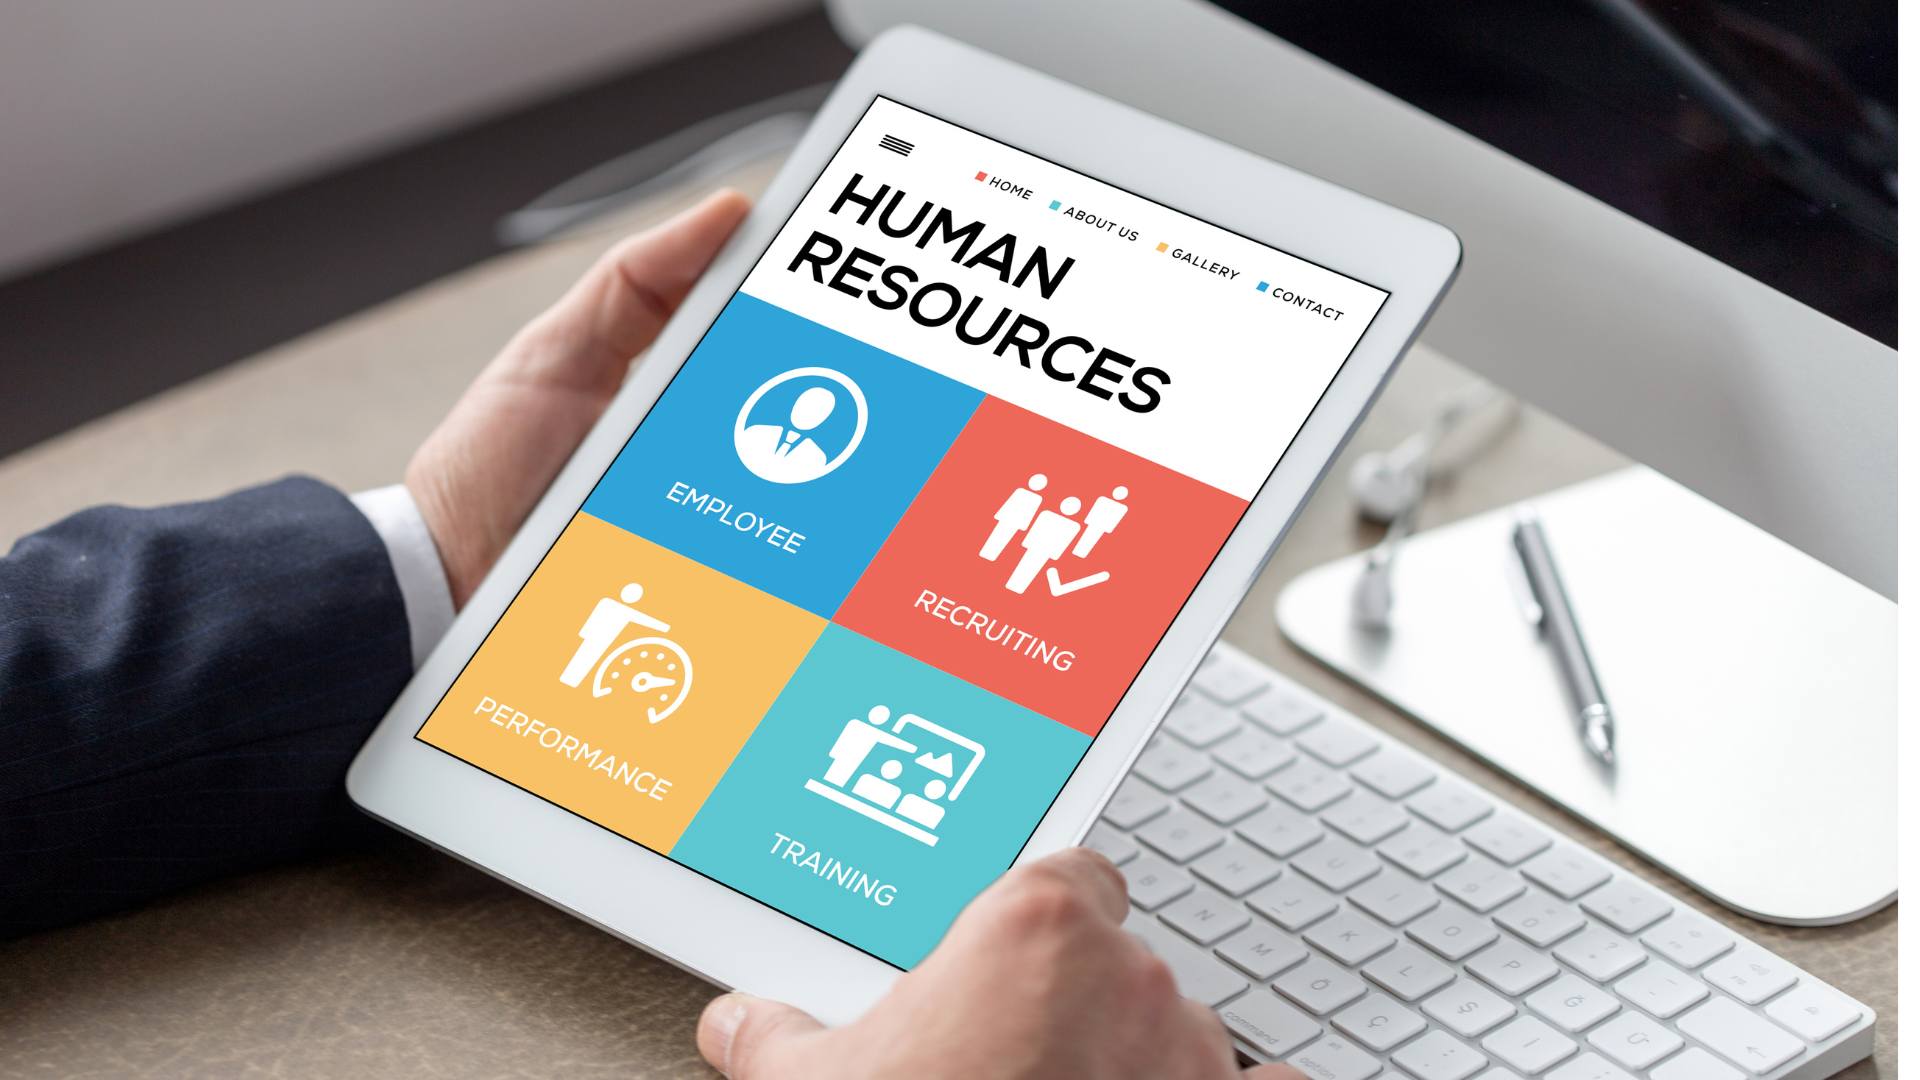 From HR CMS to Intranet: The Benefits of Investing in Internal HR Systems